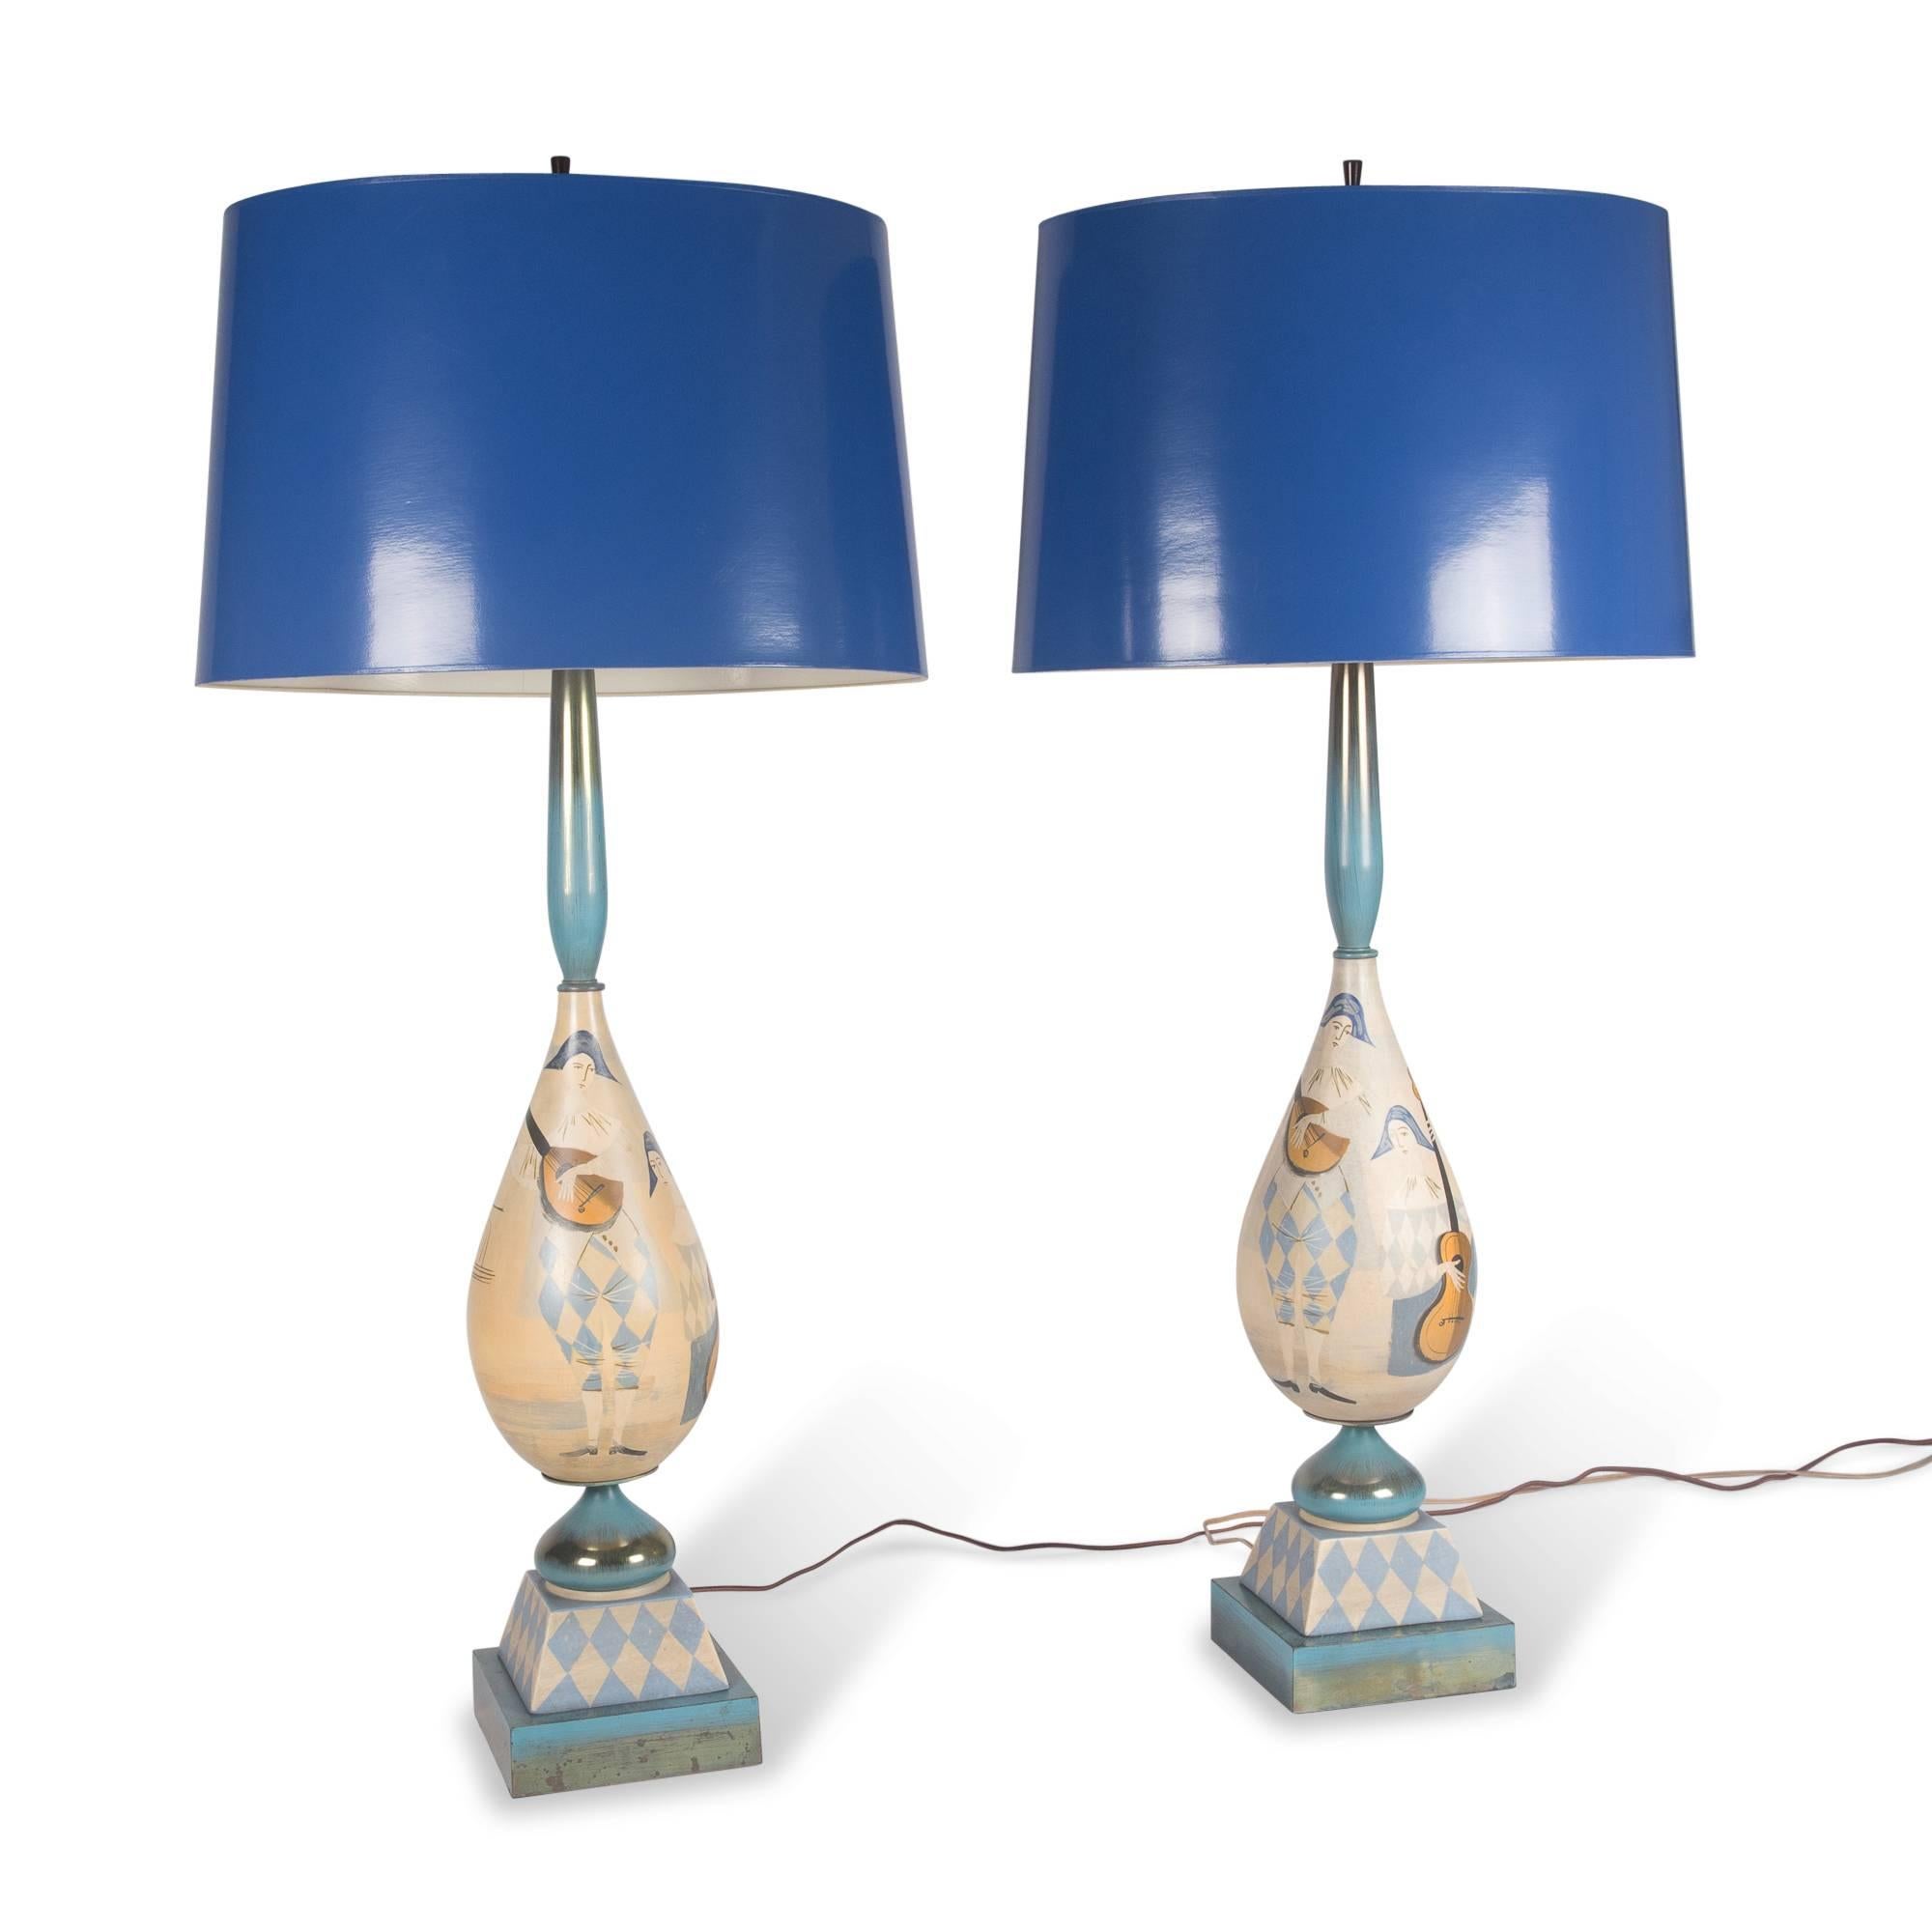 Modern Italian Hand-Painted Wood Table Lamps, 1930s For Sale